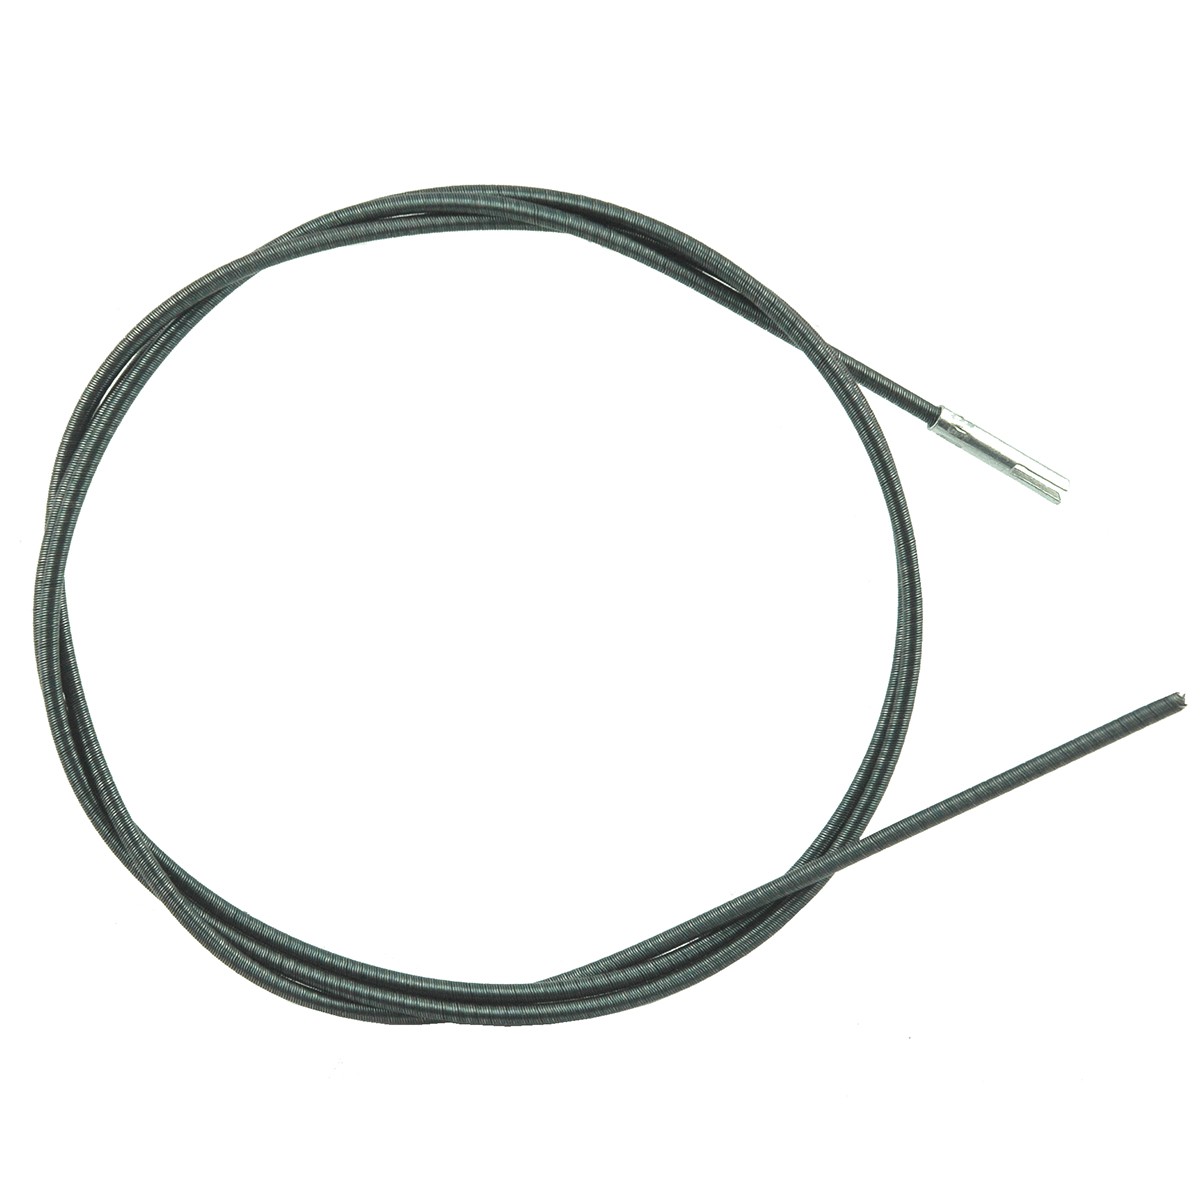 Meter cable without armor 1200 mm / Yanmar